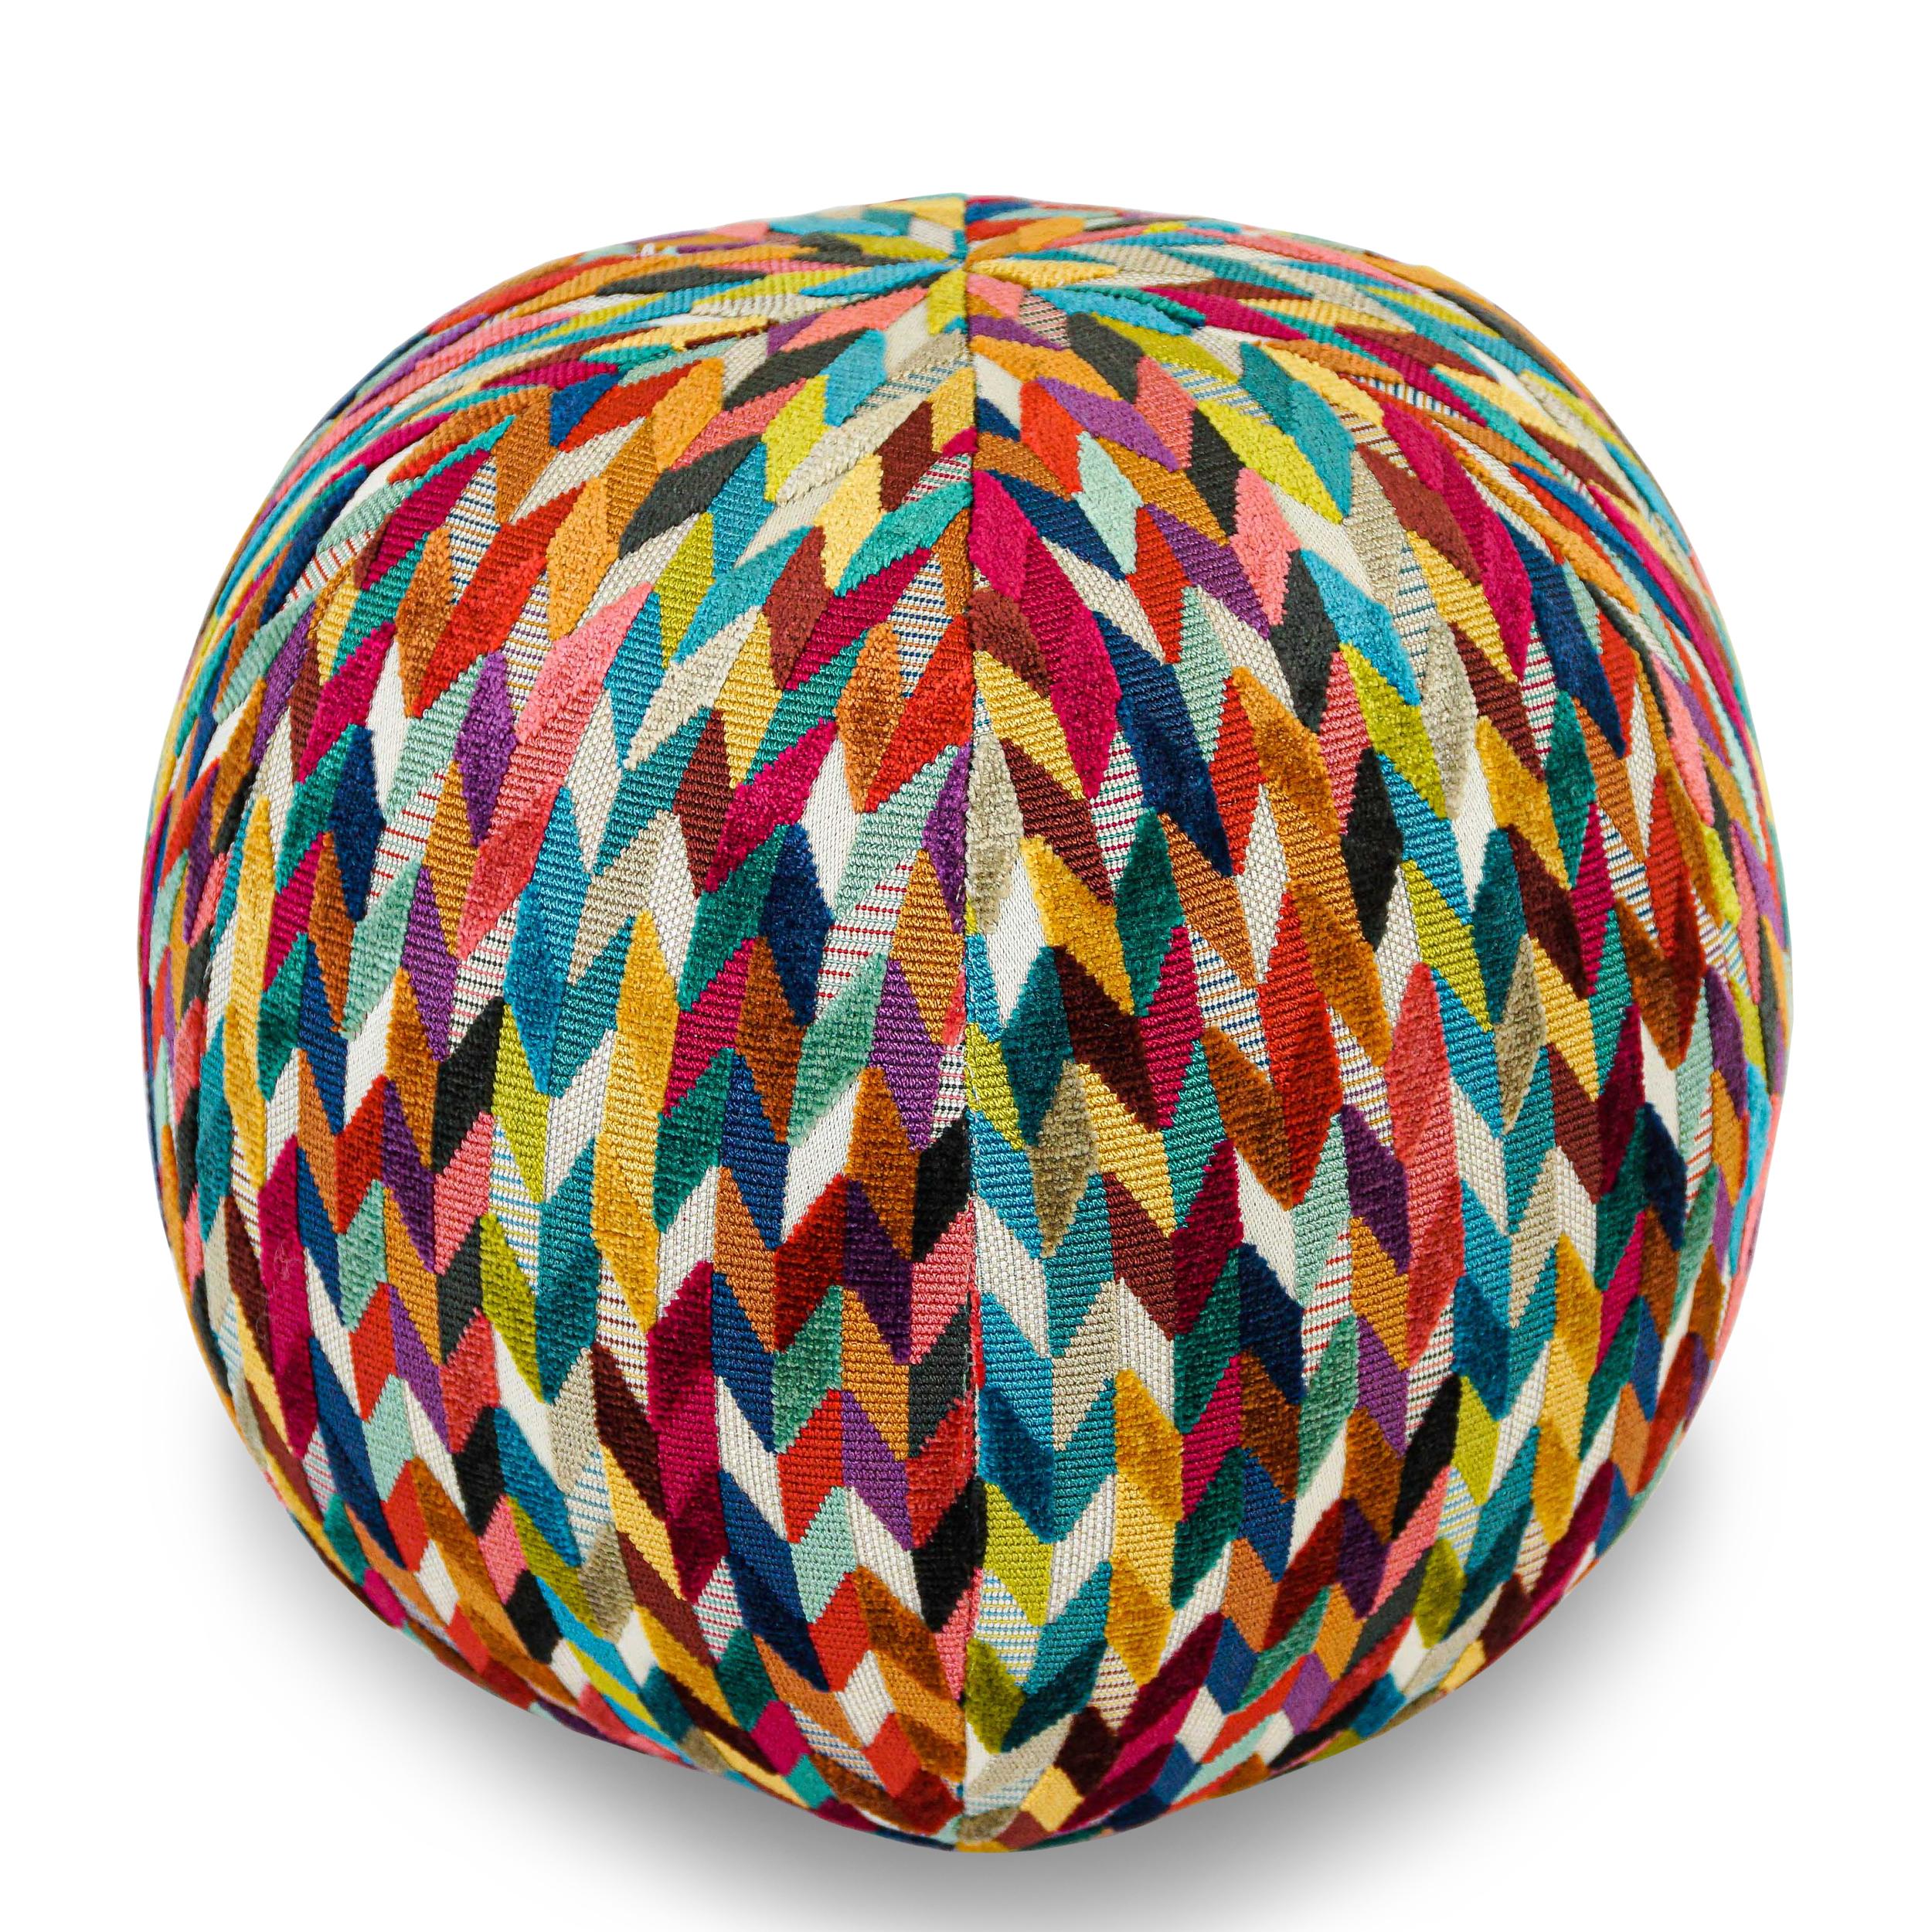 Firm down/feather stuffed ball pillow covered in Confetti colored cut velvet. Can be customized in size and fabric. Ask about current availability of shown ball. 

Measurements:
12” diameter x 12” height
Disclaimer: Due to their handcrafted nature,